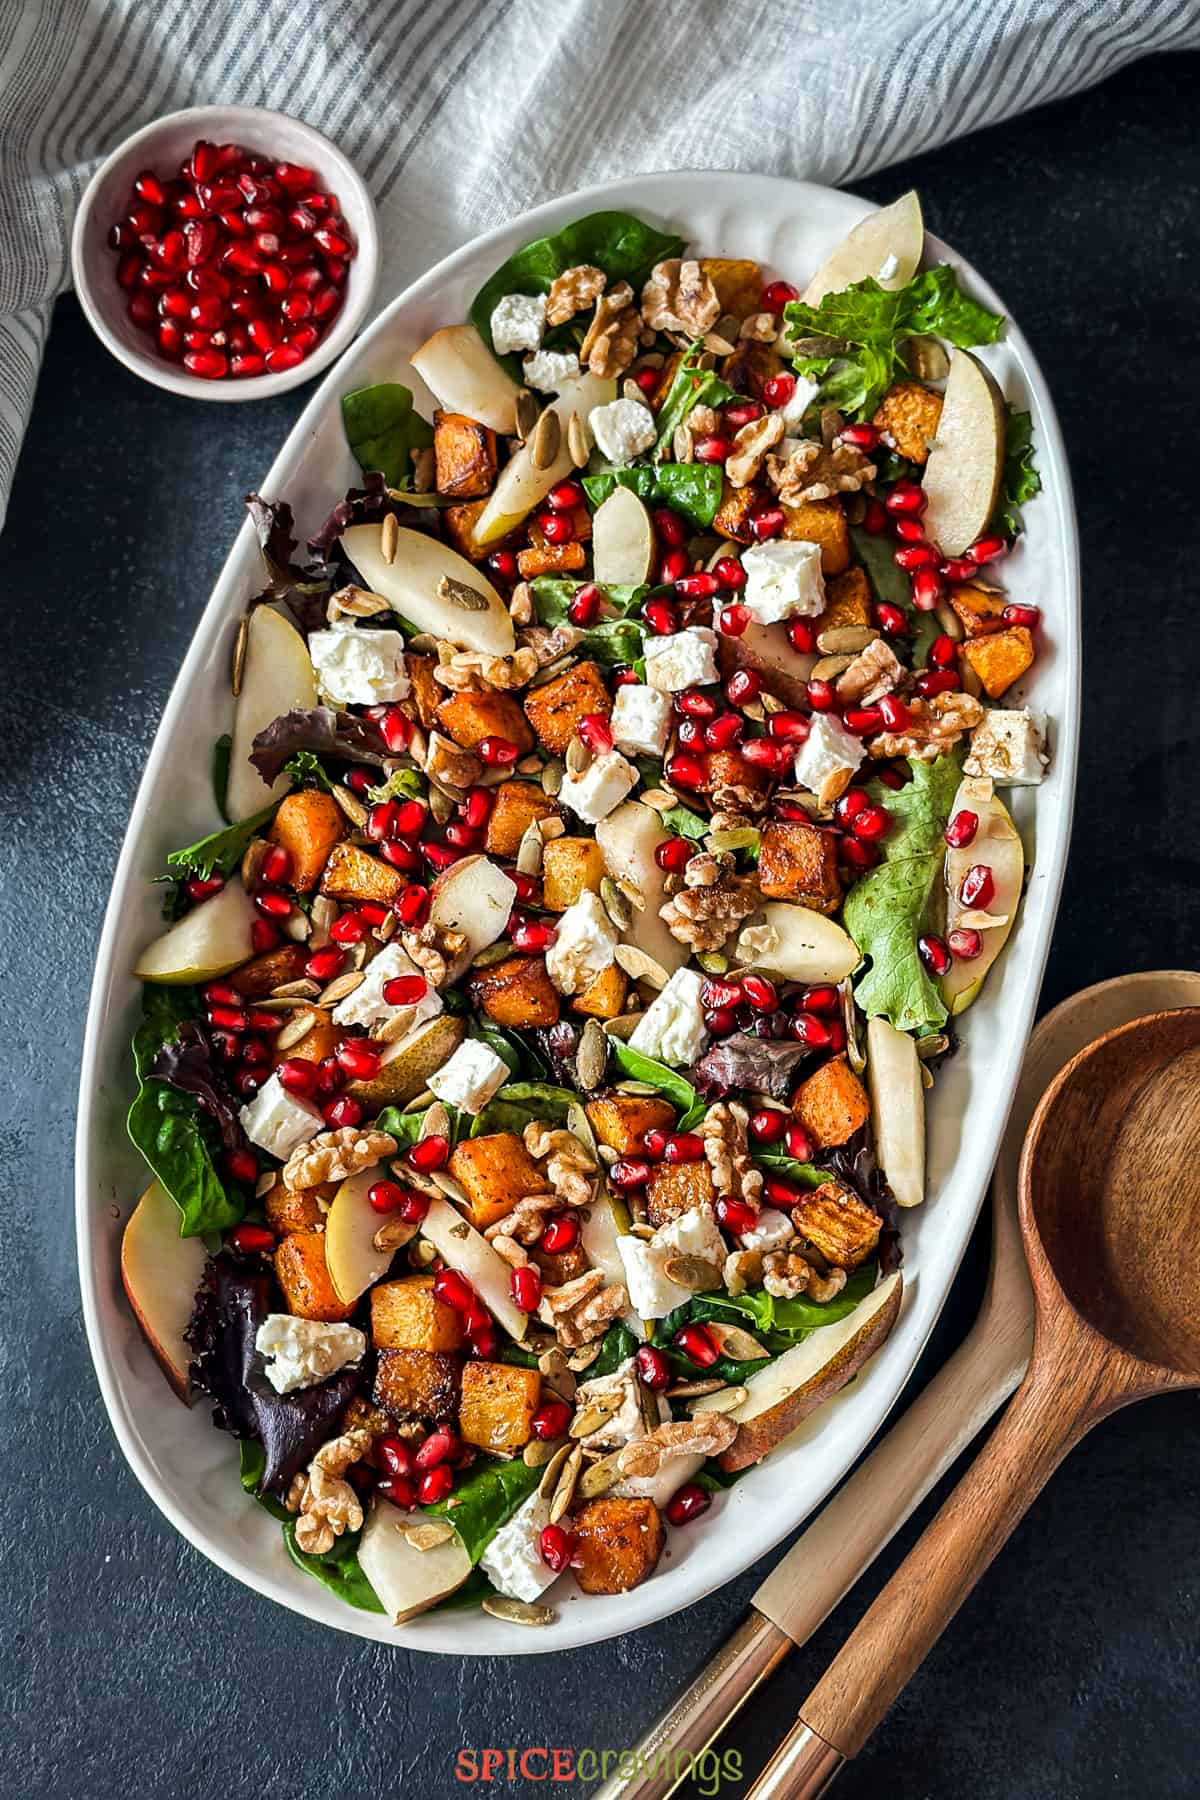 Salad platter with greens, butternut squash, feta and pomegranate